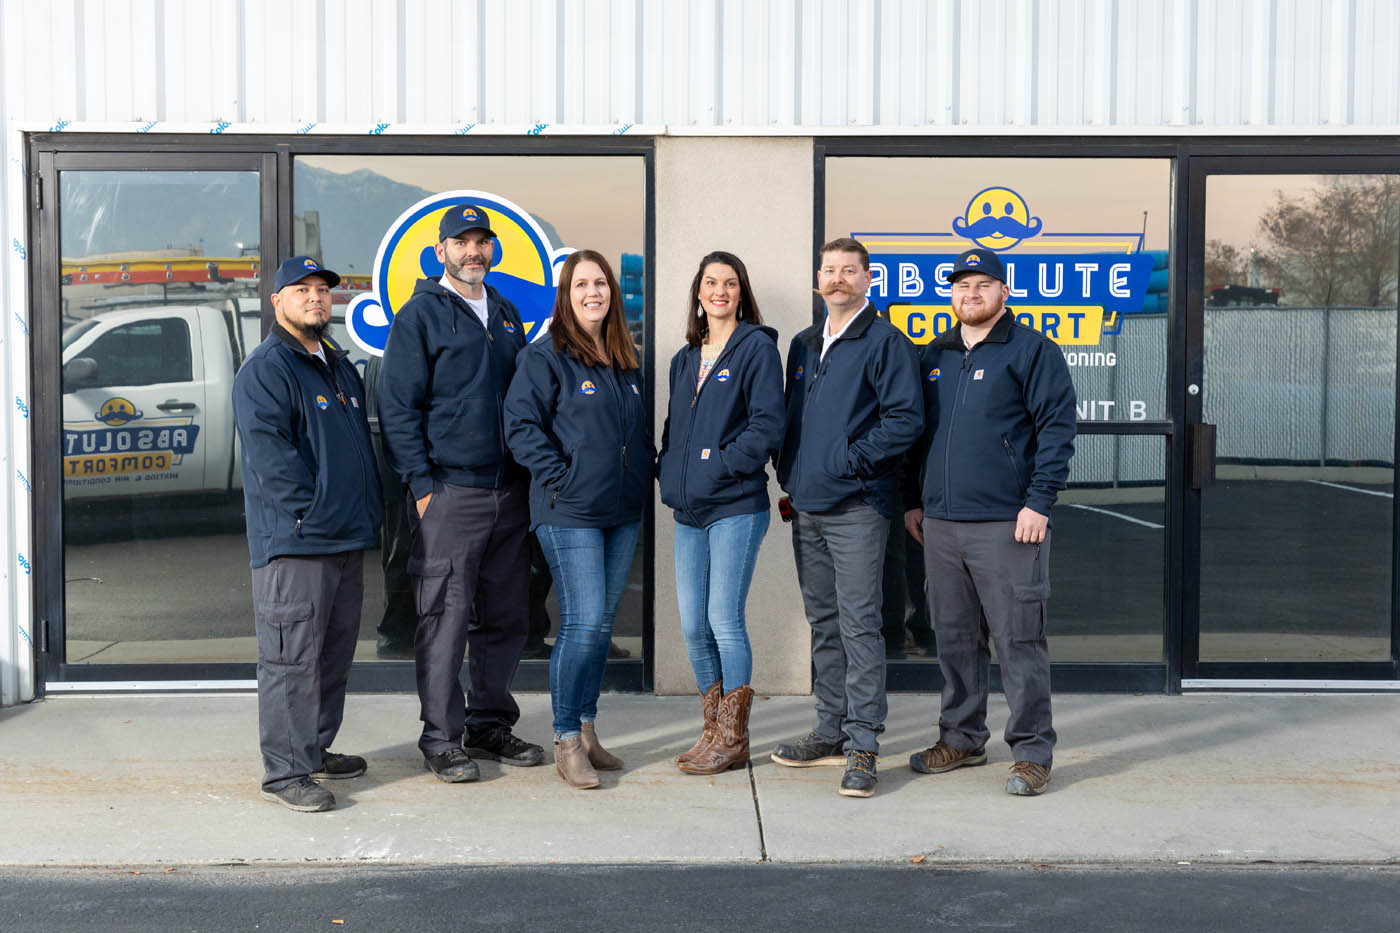 The team at Absolute Comfort - experts in HVAC services.